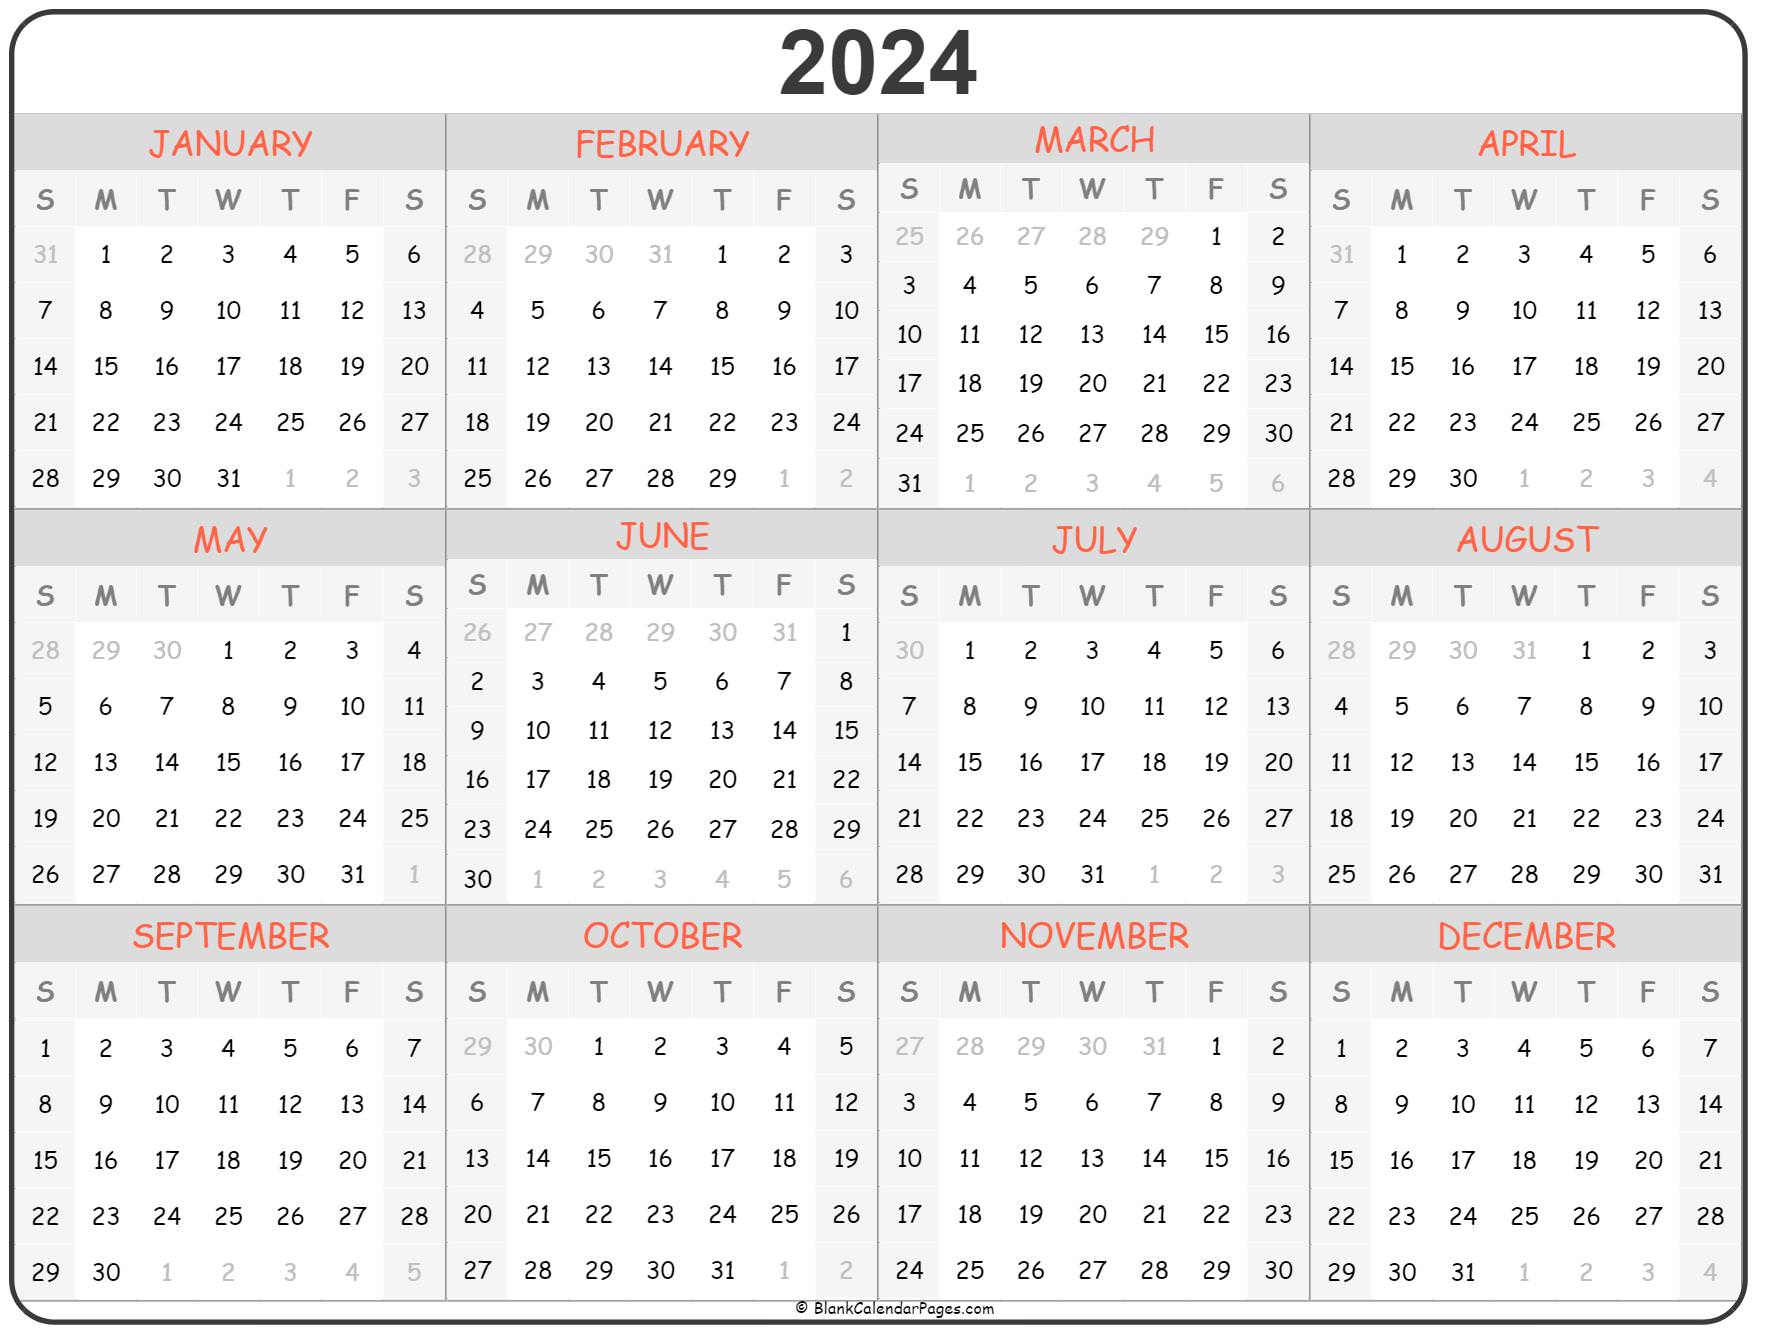 Printable Calendar Daily Planner 2024 Latest Top The Best Review Of 